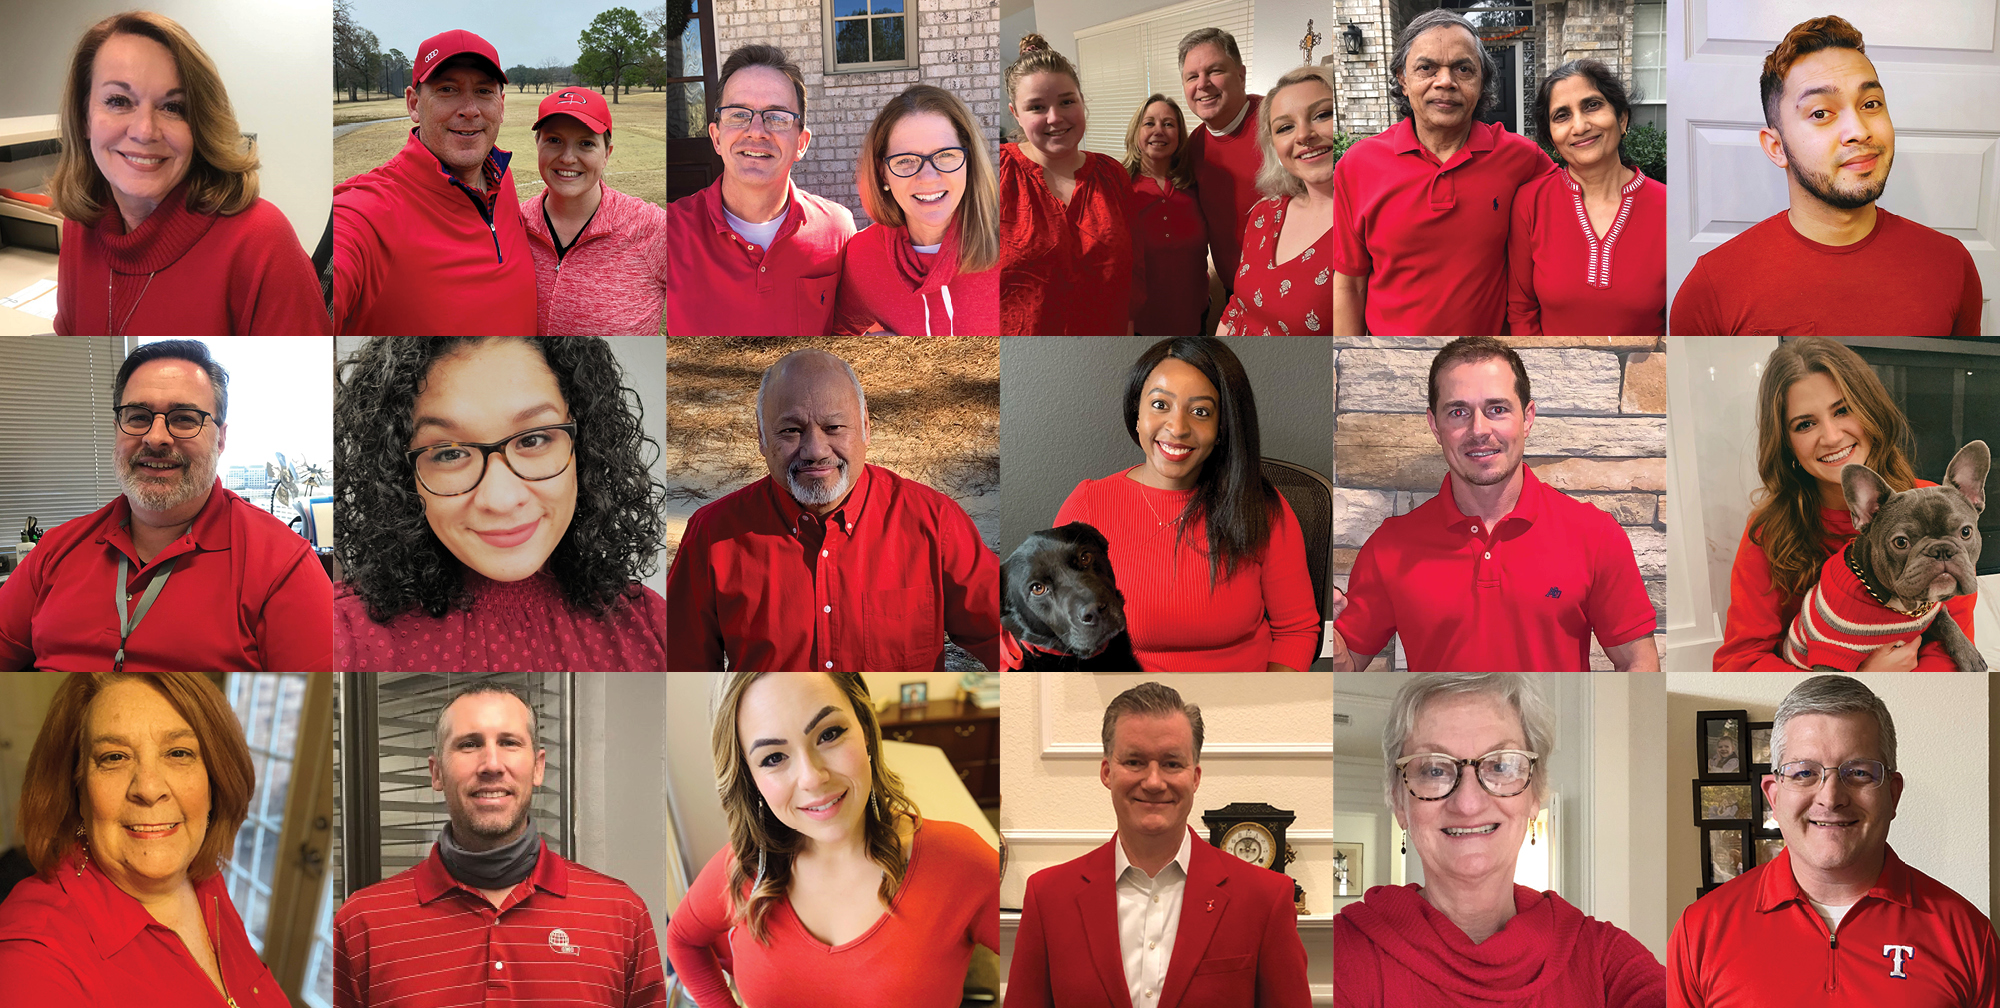 AMERICAN HEART ASSOCIATION Employees all (virtually) Going Red for Women